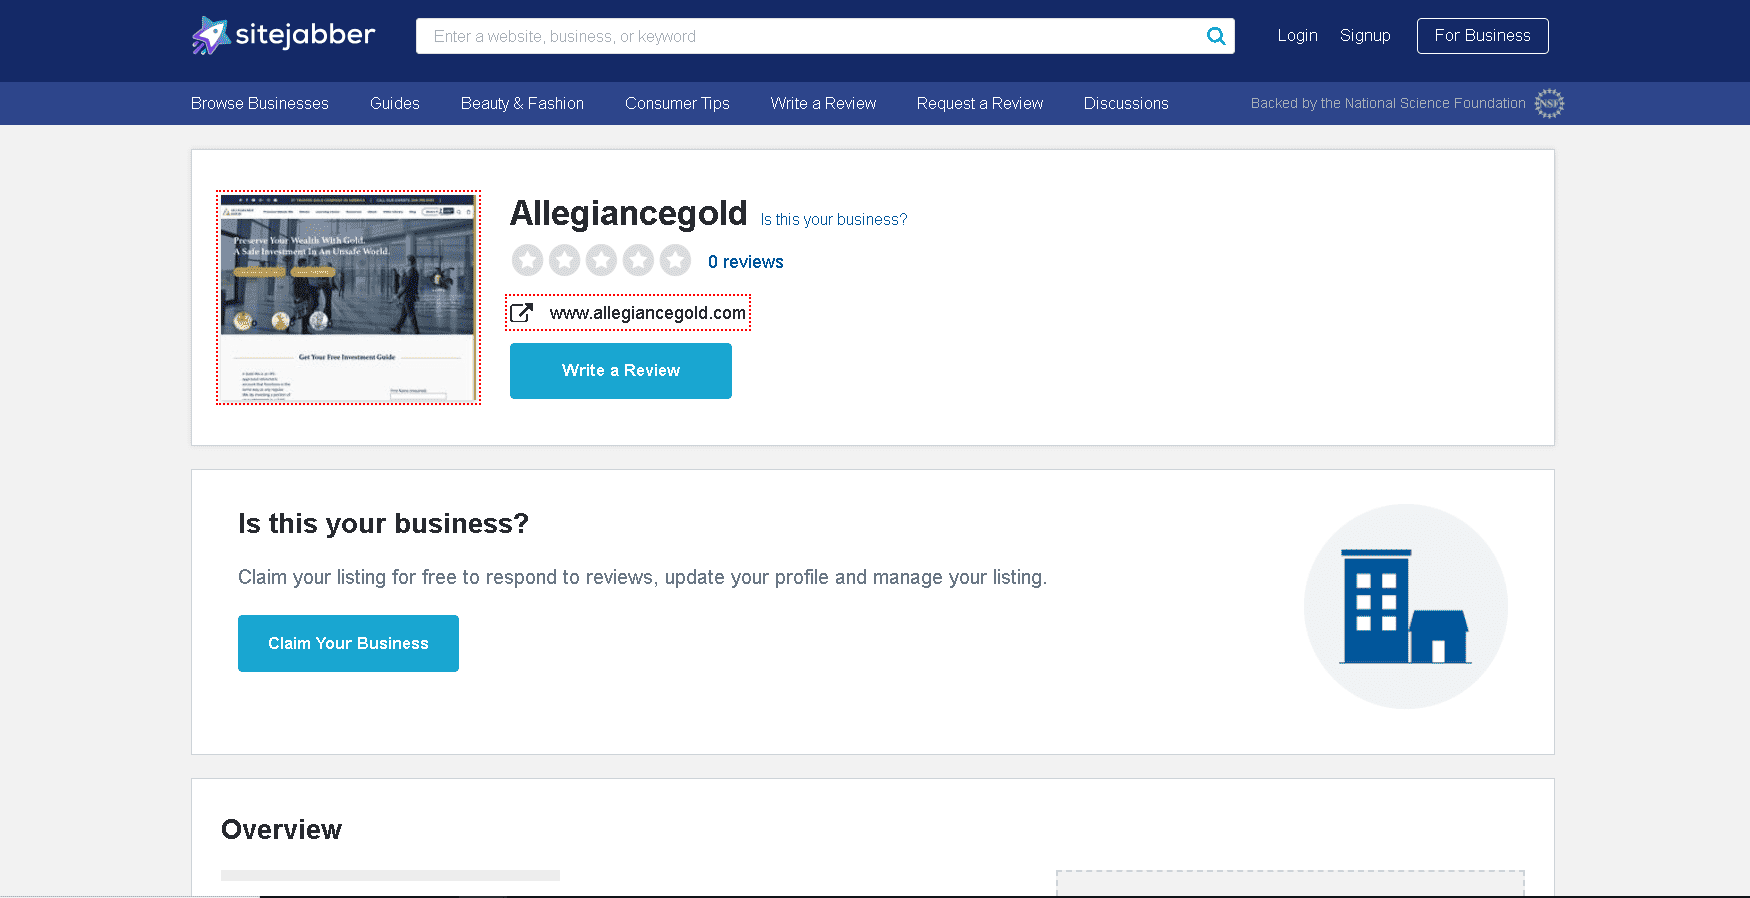 Allegiance Gold don't have a profile and customer reviews on Sitejabber